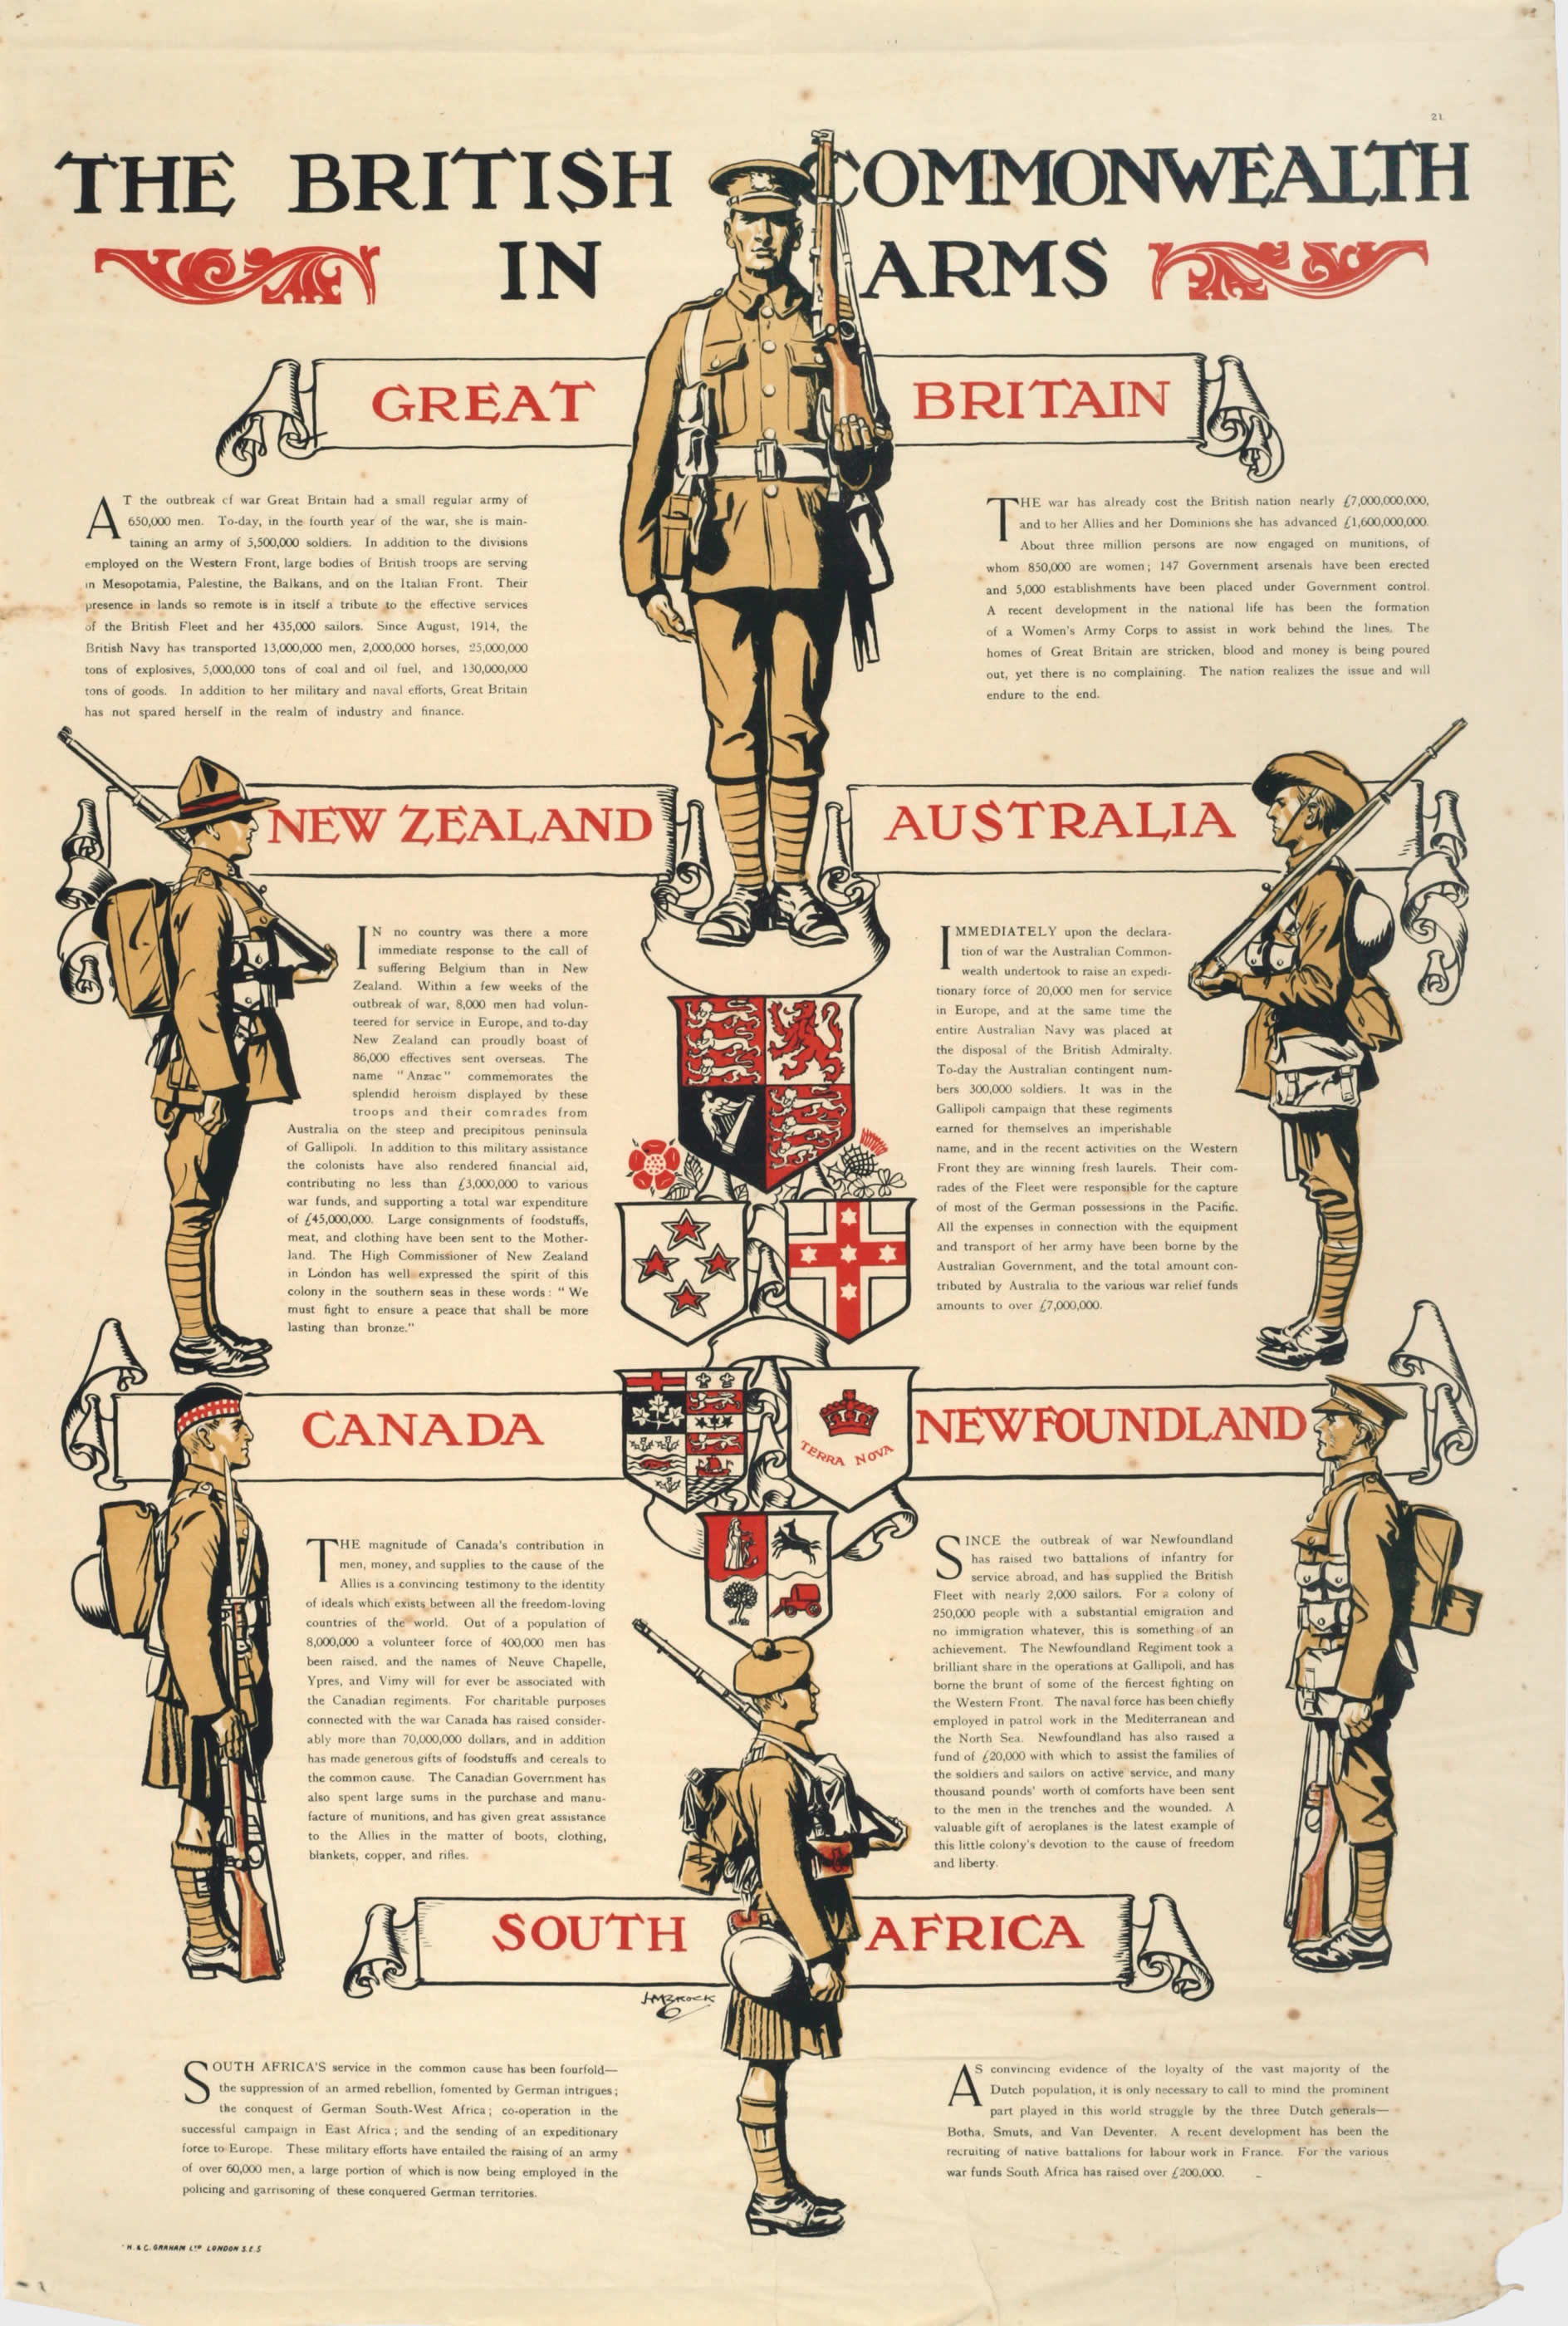 The British Commonwealth in Arms